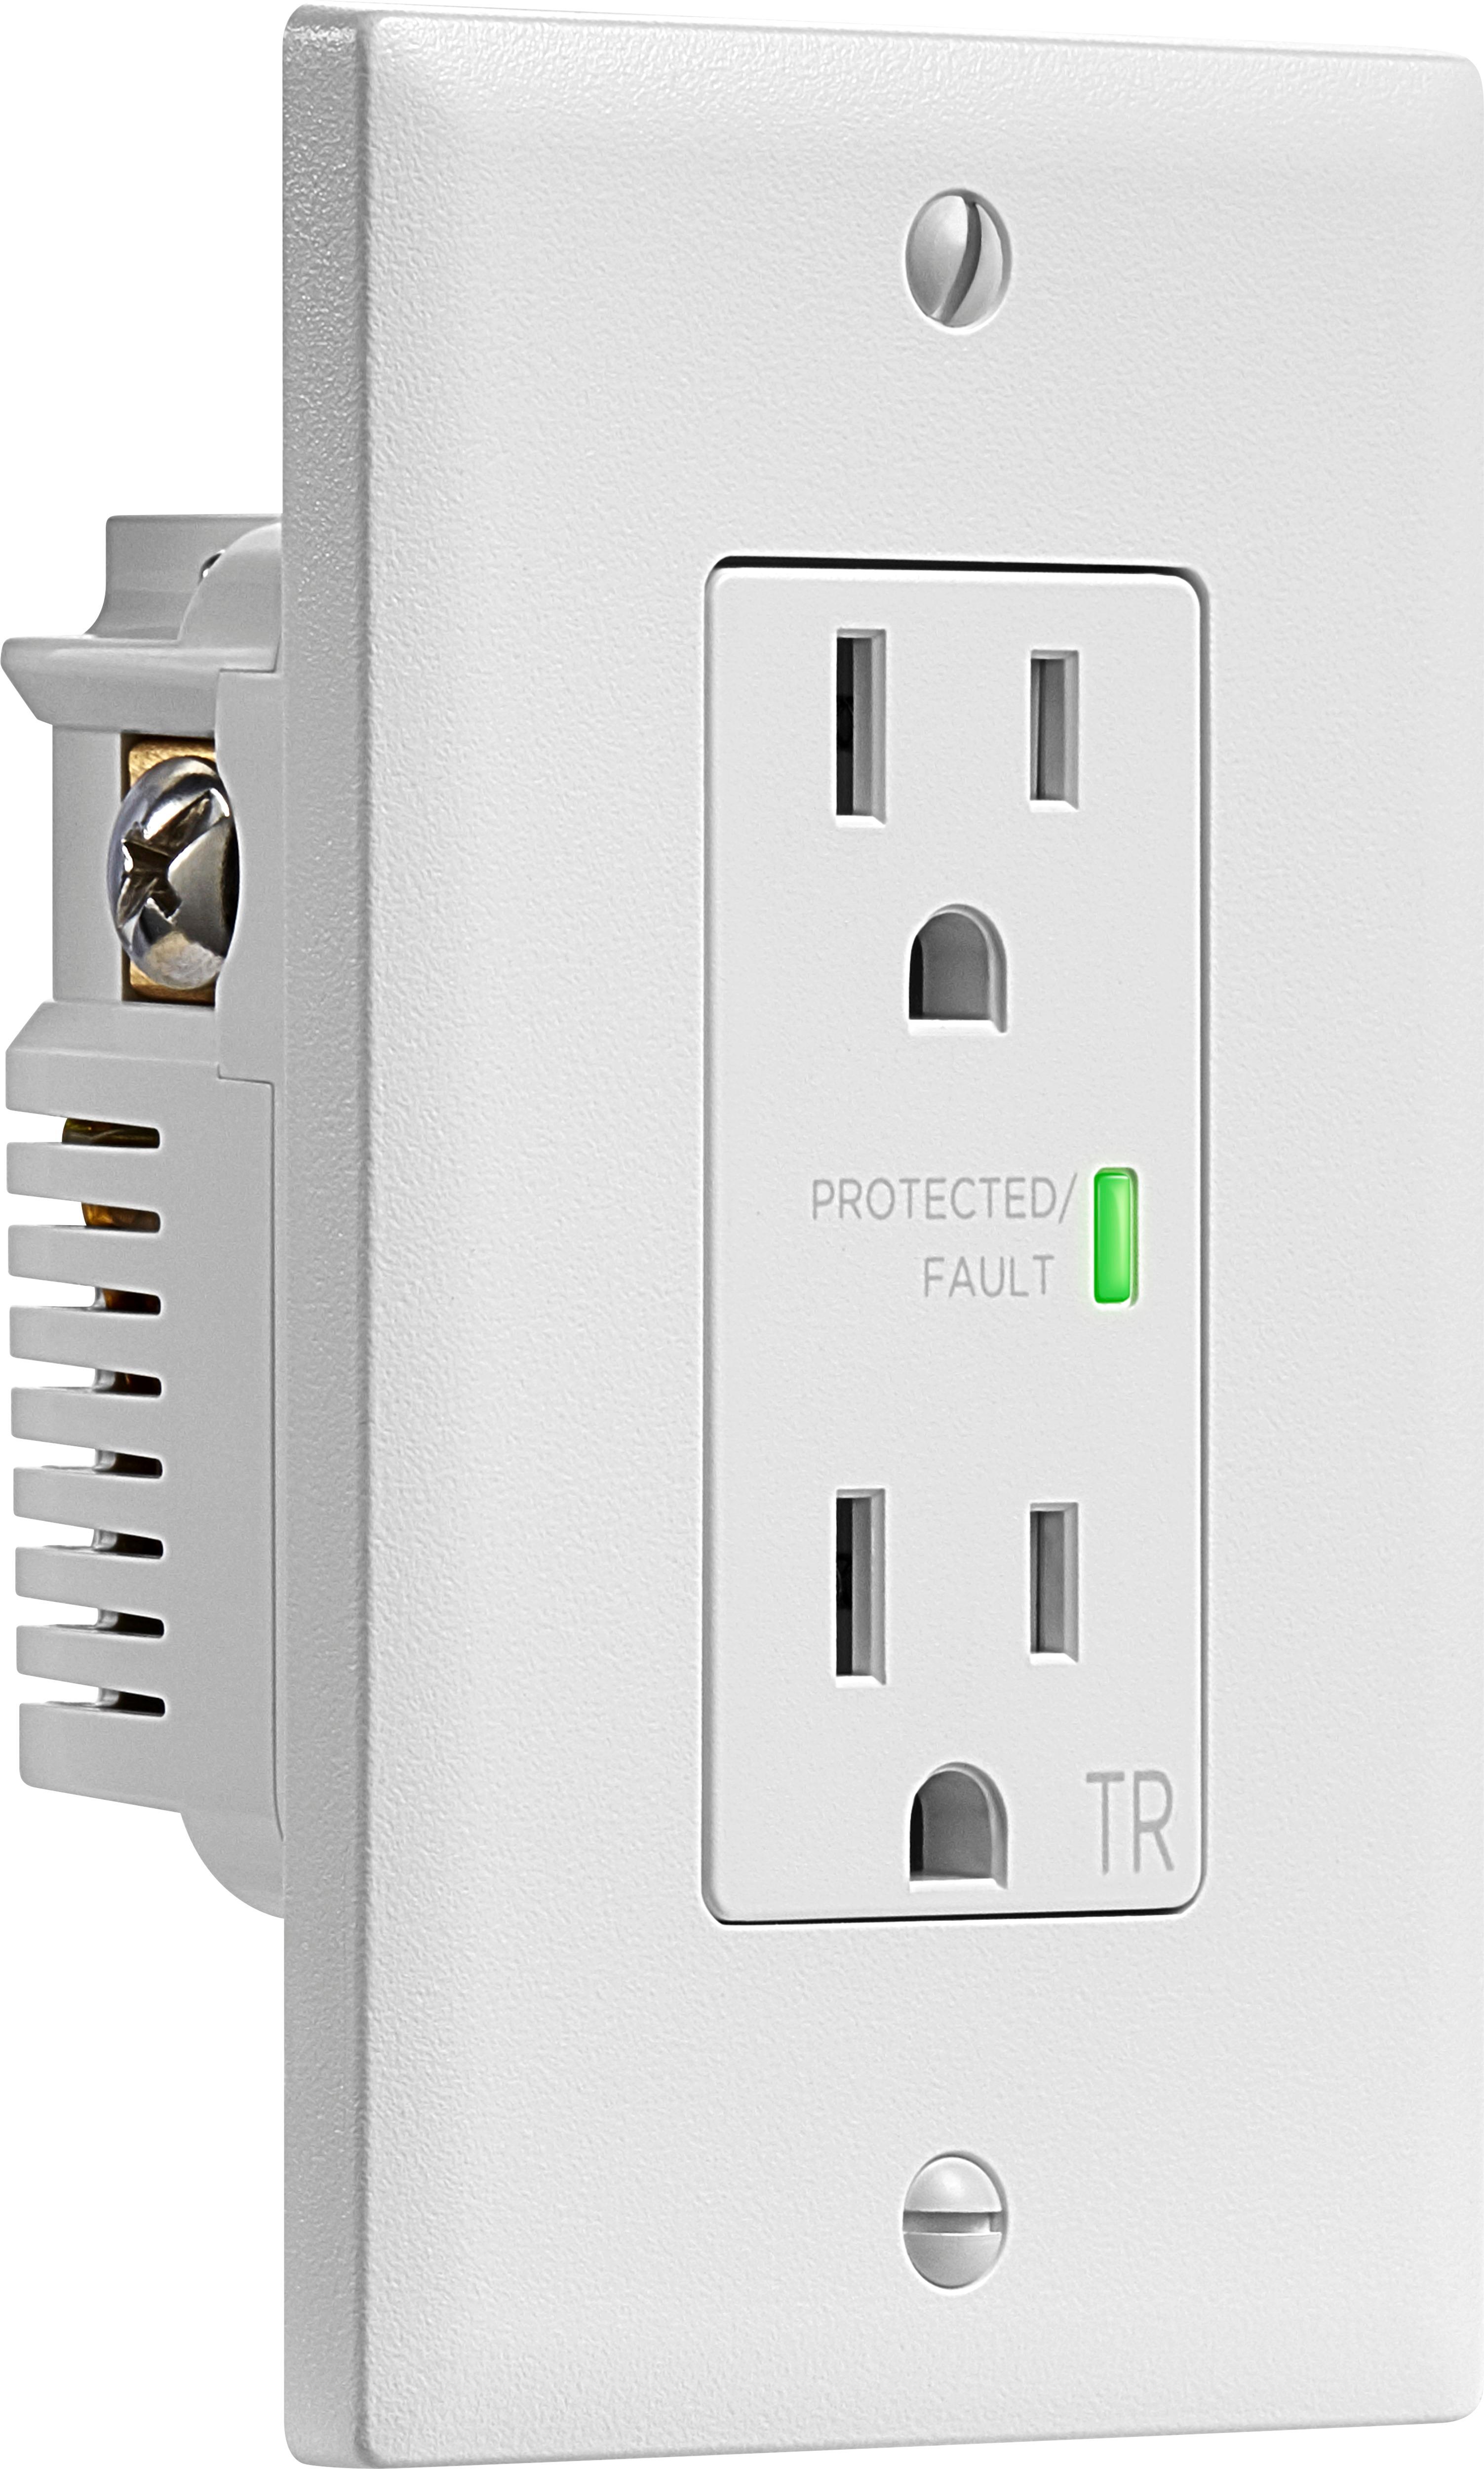 Insignia 2-Outlet In-Wall Surge Protector White NS-HW120S18 - Best Buy